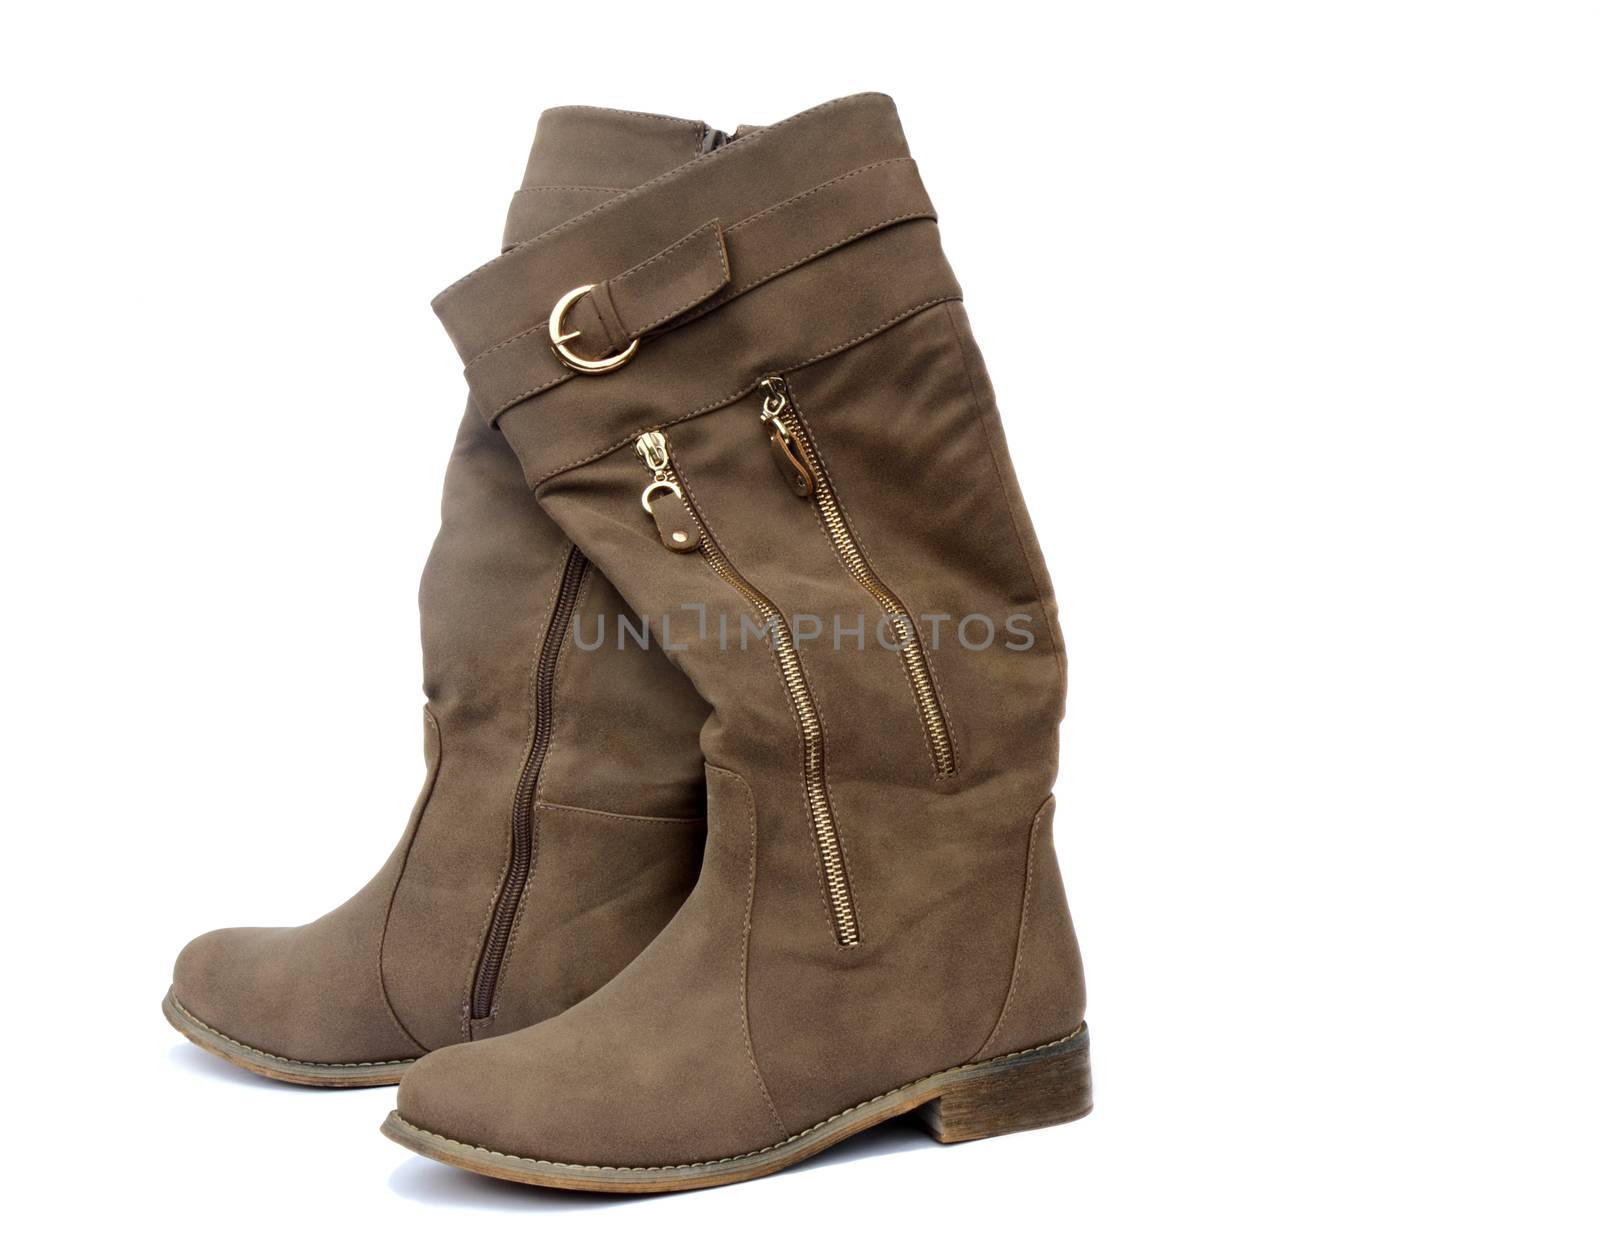 Women's brown soft skin boots with beautiful Chateaux. Presented on a white background